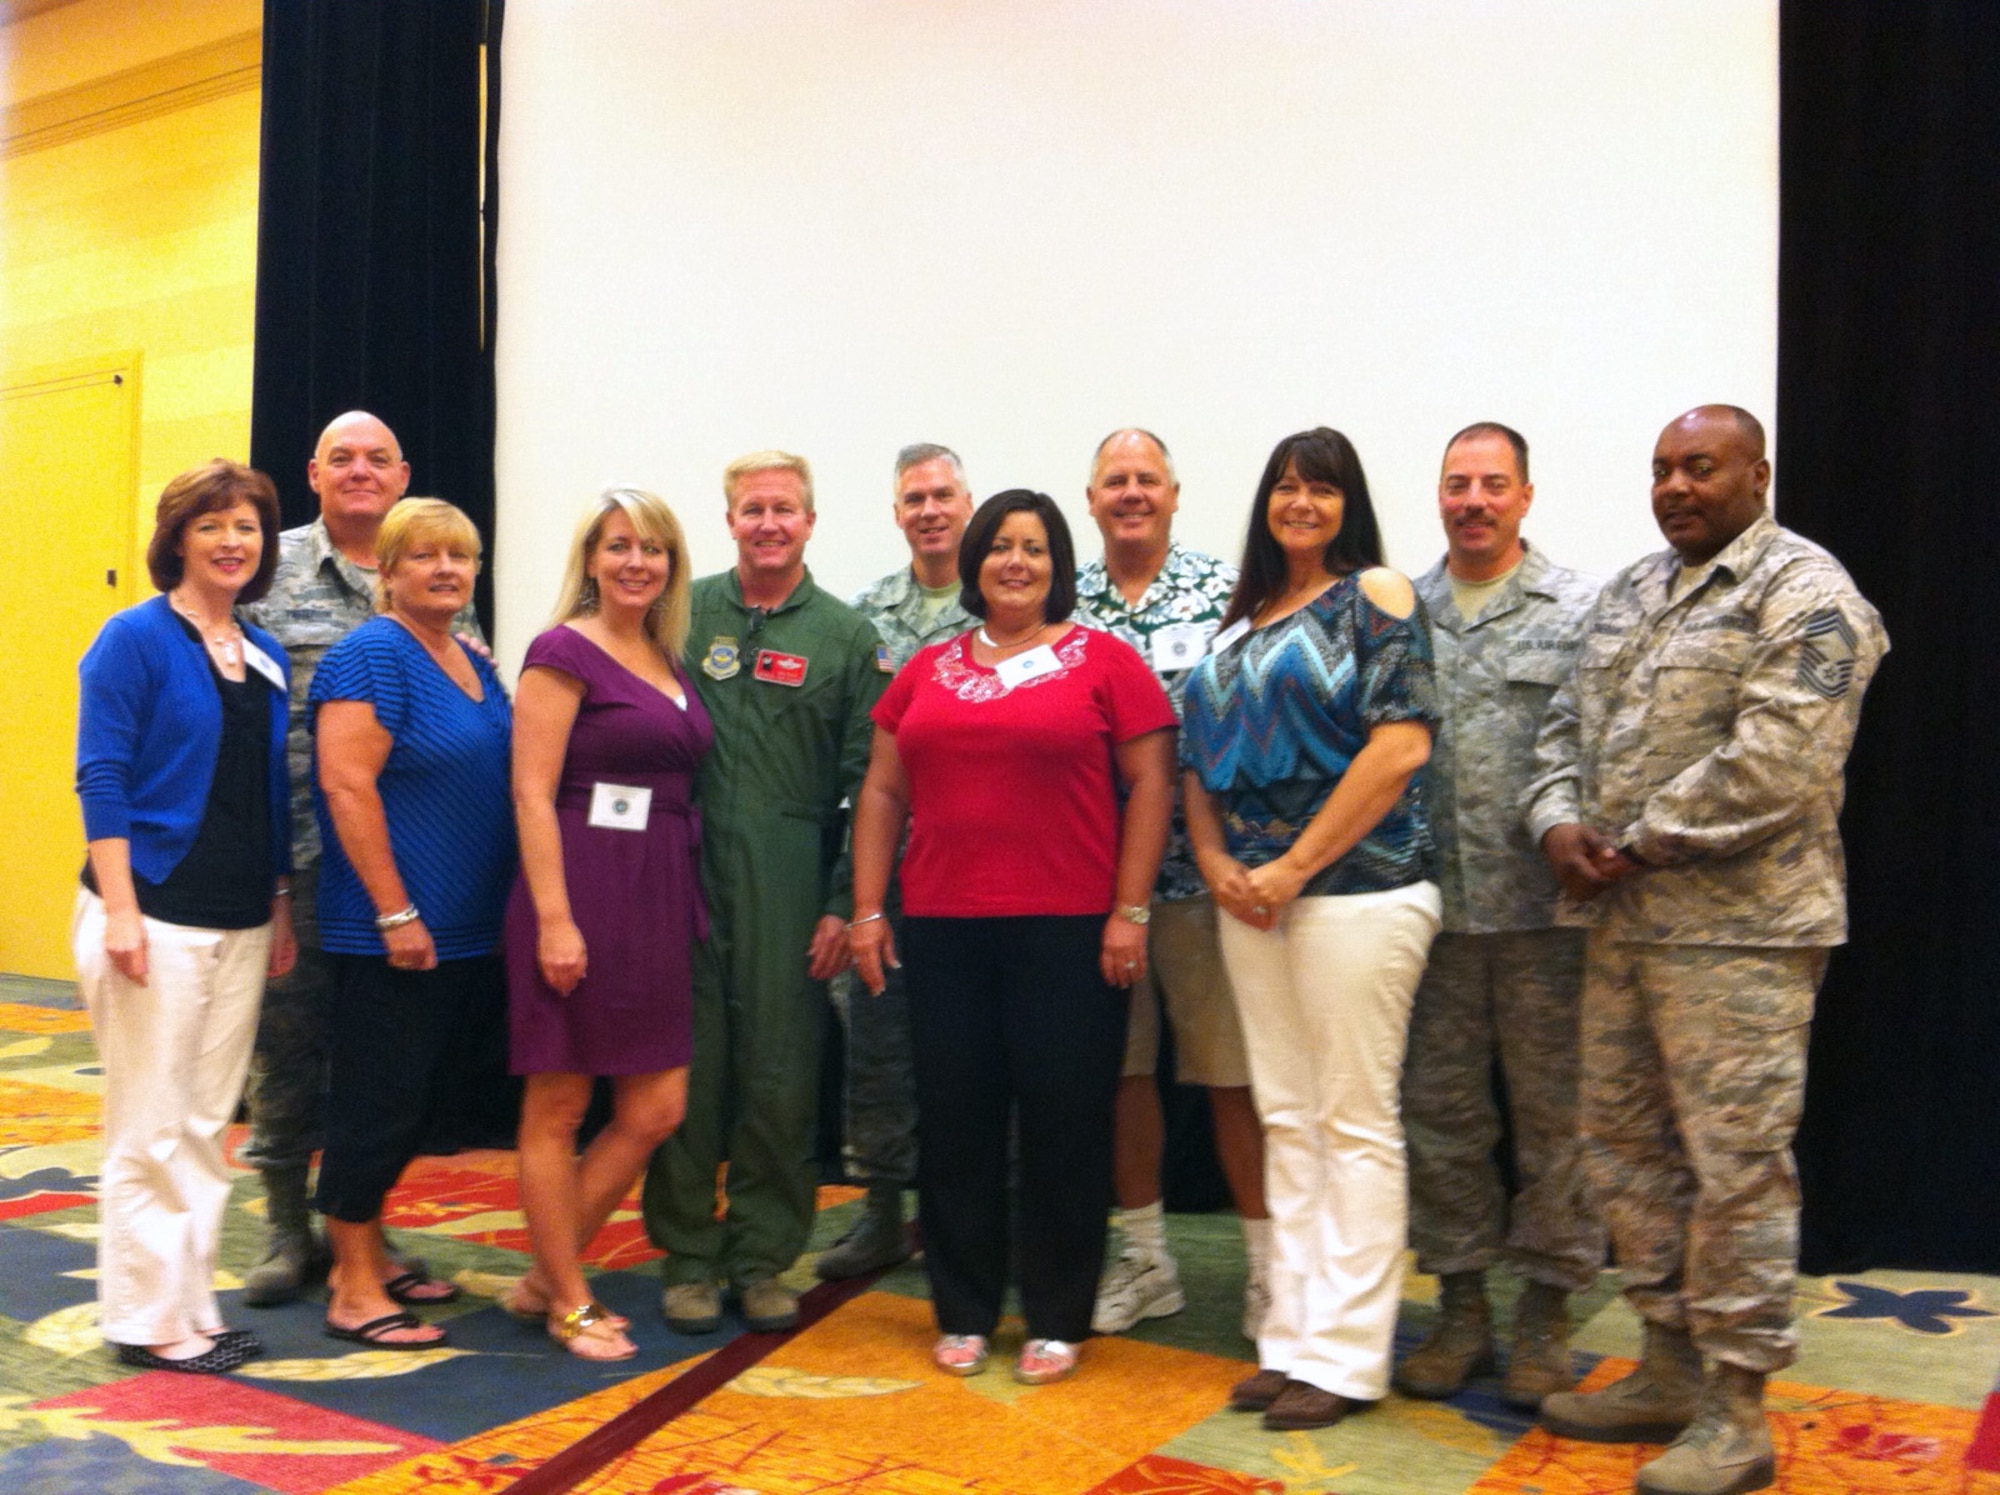 165th Airlift Wing Key Spouses Mrs. Judi Lenz and Mrs. Stacy Roberts receive awards at the 2013 Georgia National Guard Family Readiness Conference. Mrs. Lenz (3rd from right) won Volunteer of the Year (Air) for the state of Georgia and Mrs. Stacey Roberts (5th from right) received the Key Spouse Outstanding Service Award. (photo donated)